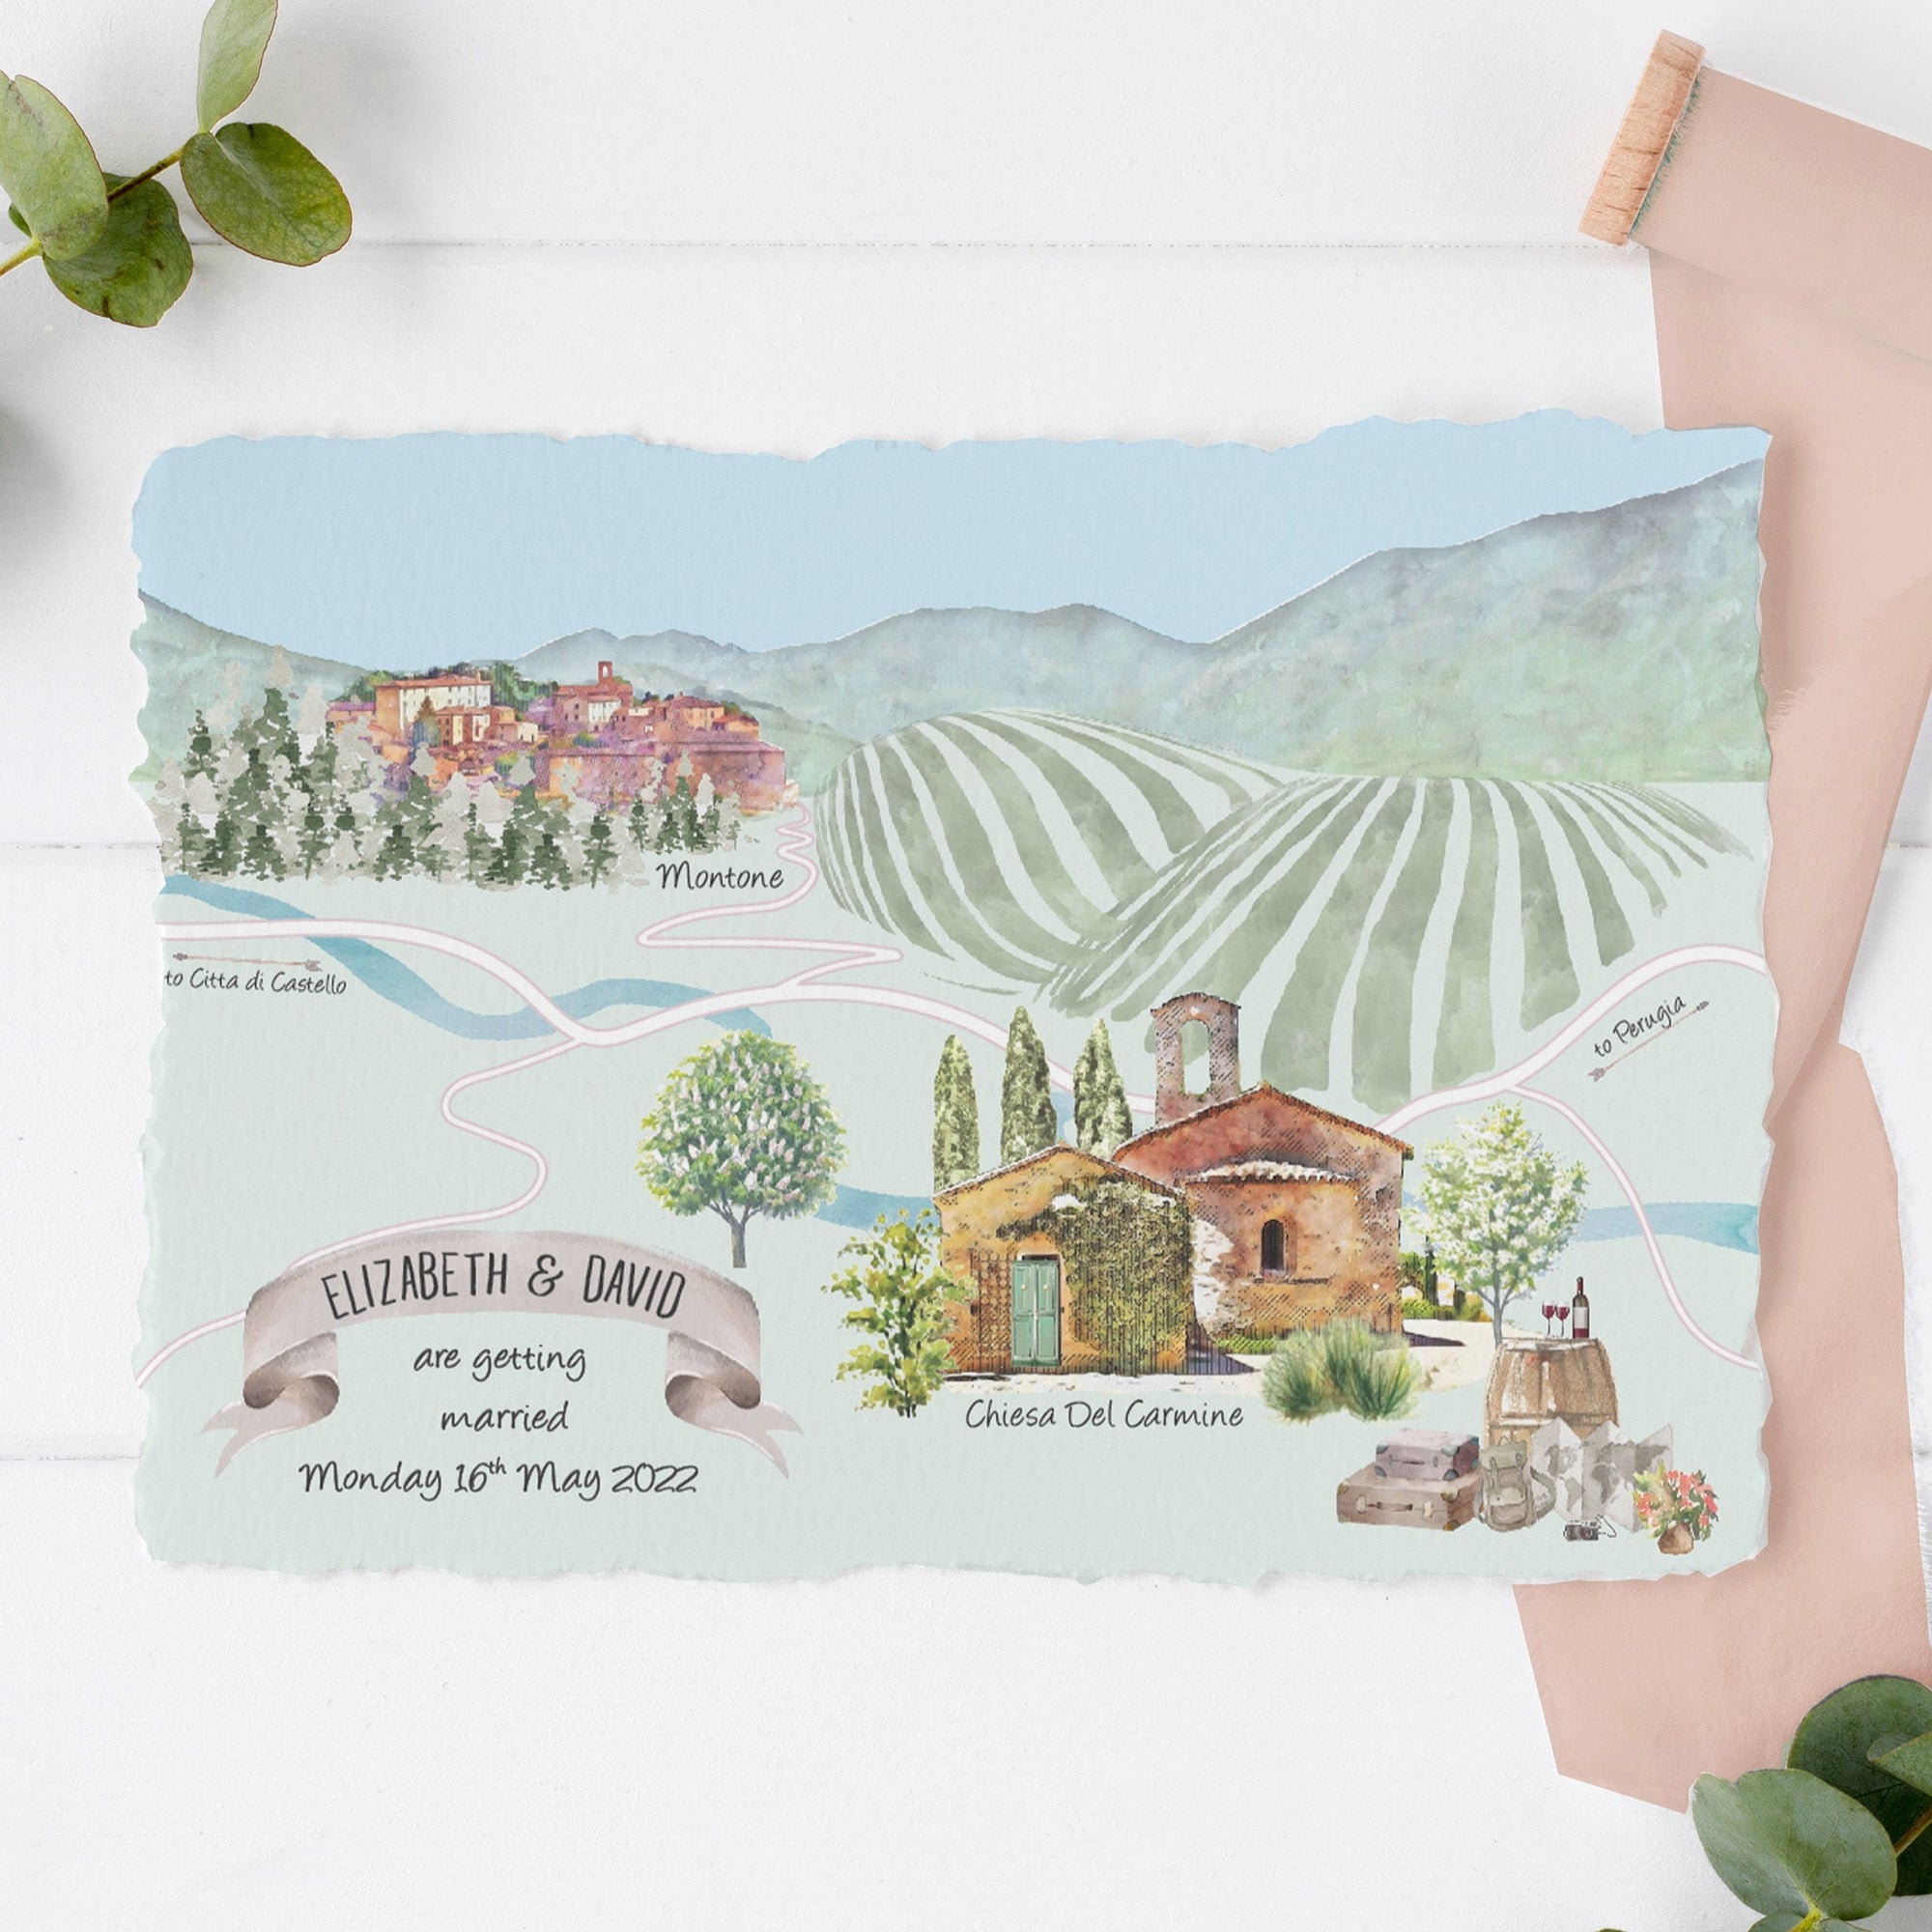 Illustrated watercolour Wedding Map featuring Montone in Italy and the Chiesa Del Carmine. Vineyards and rolling hills. From Mustard and Gray